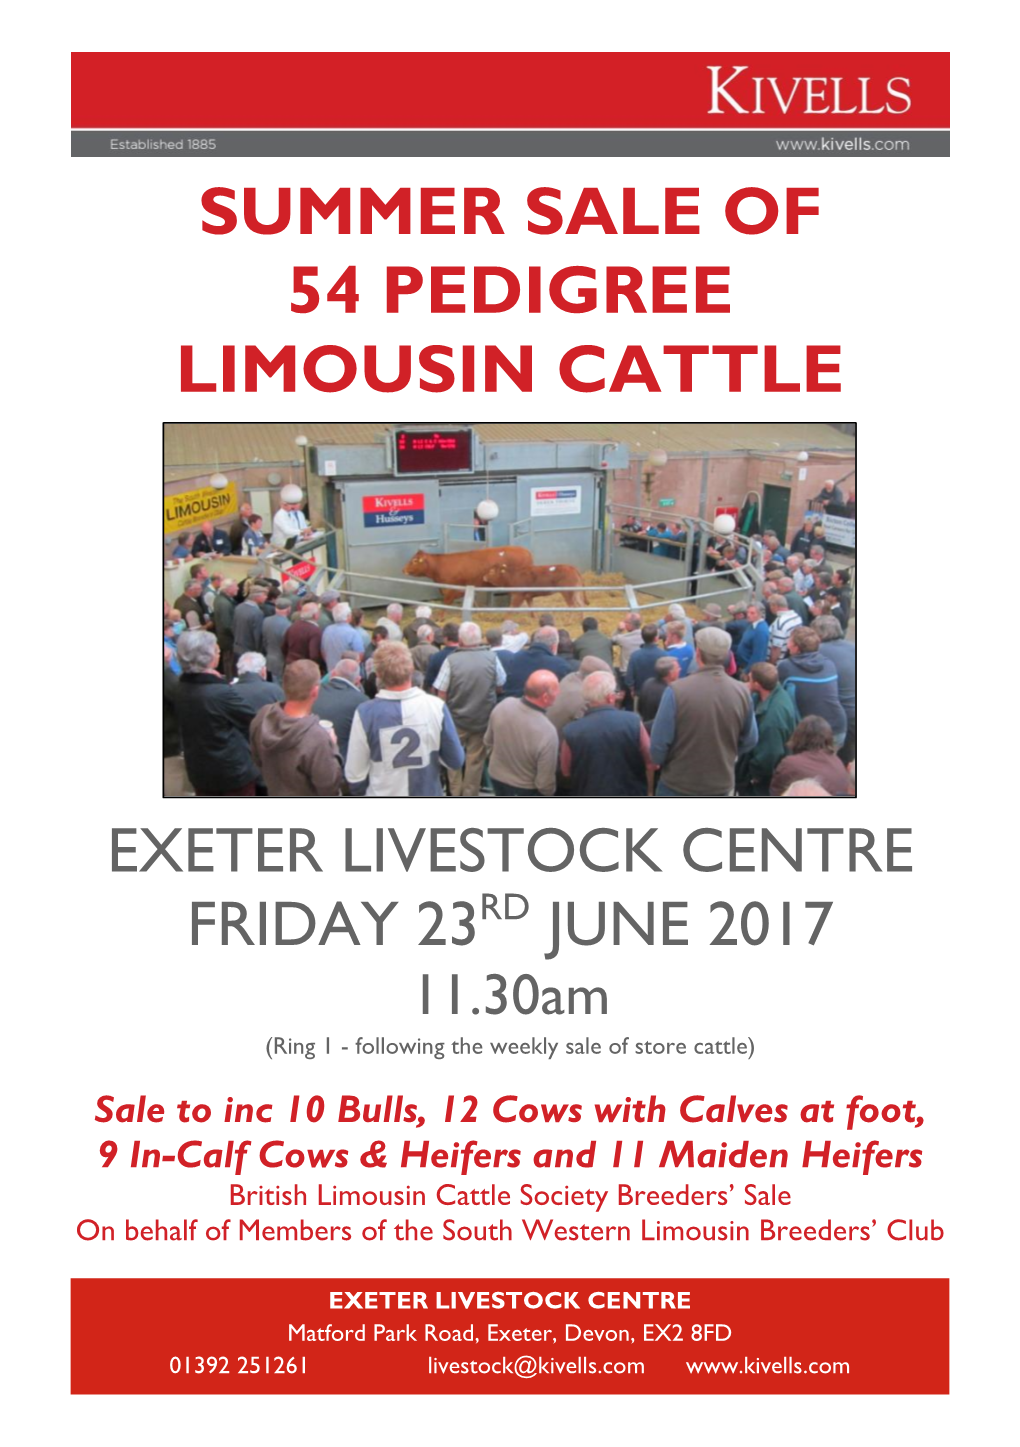 Summer Sale of 54 Pedigree Limousin Cattle